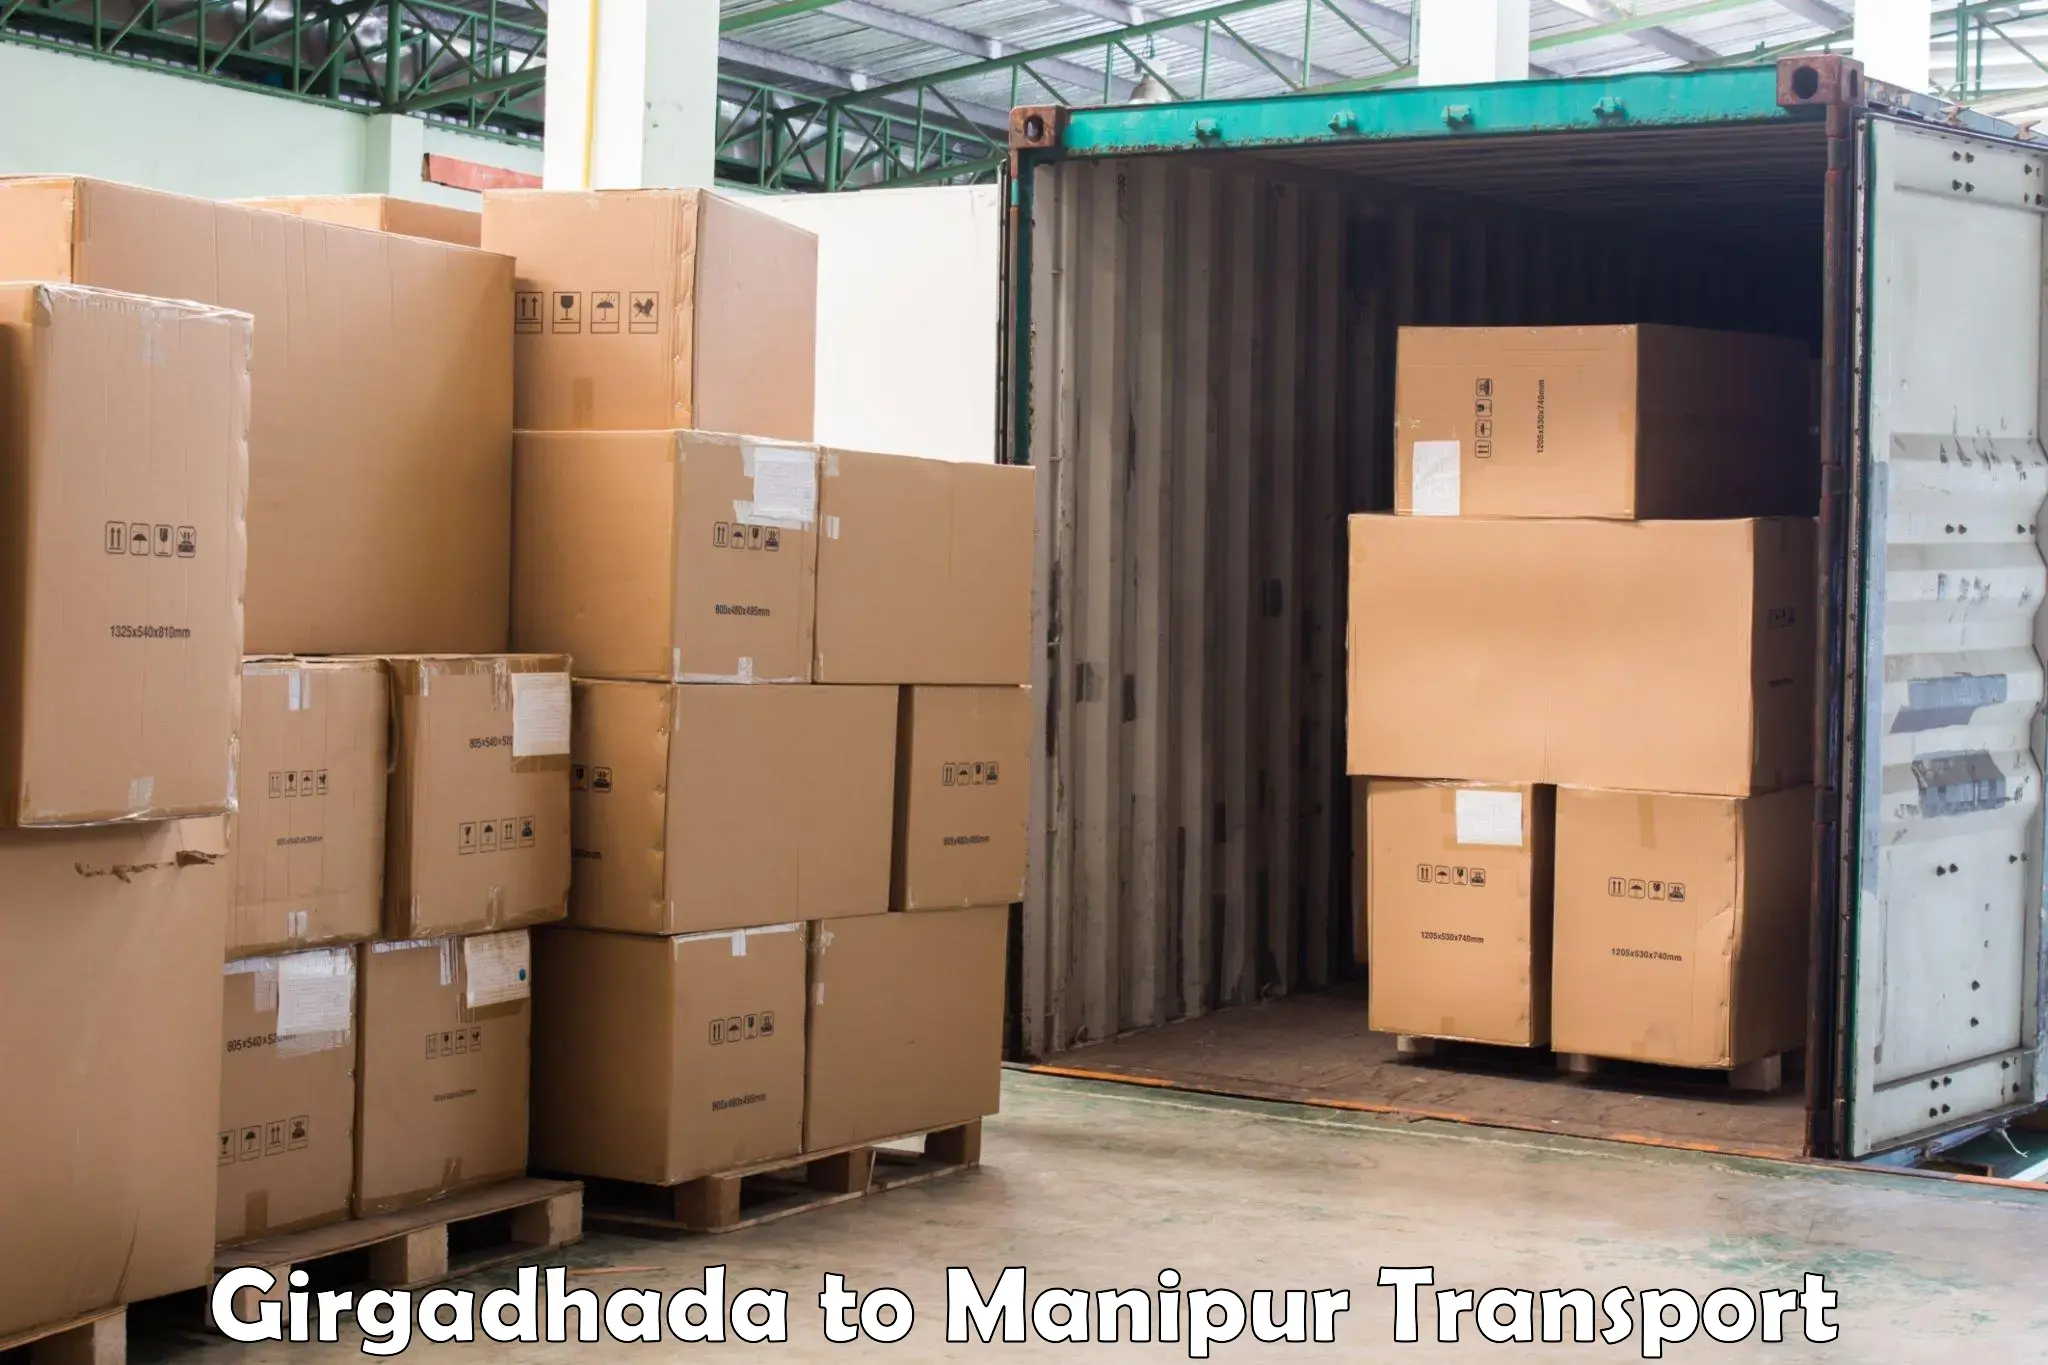 Commercial transport service Girgadhada to Manipur